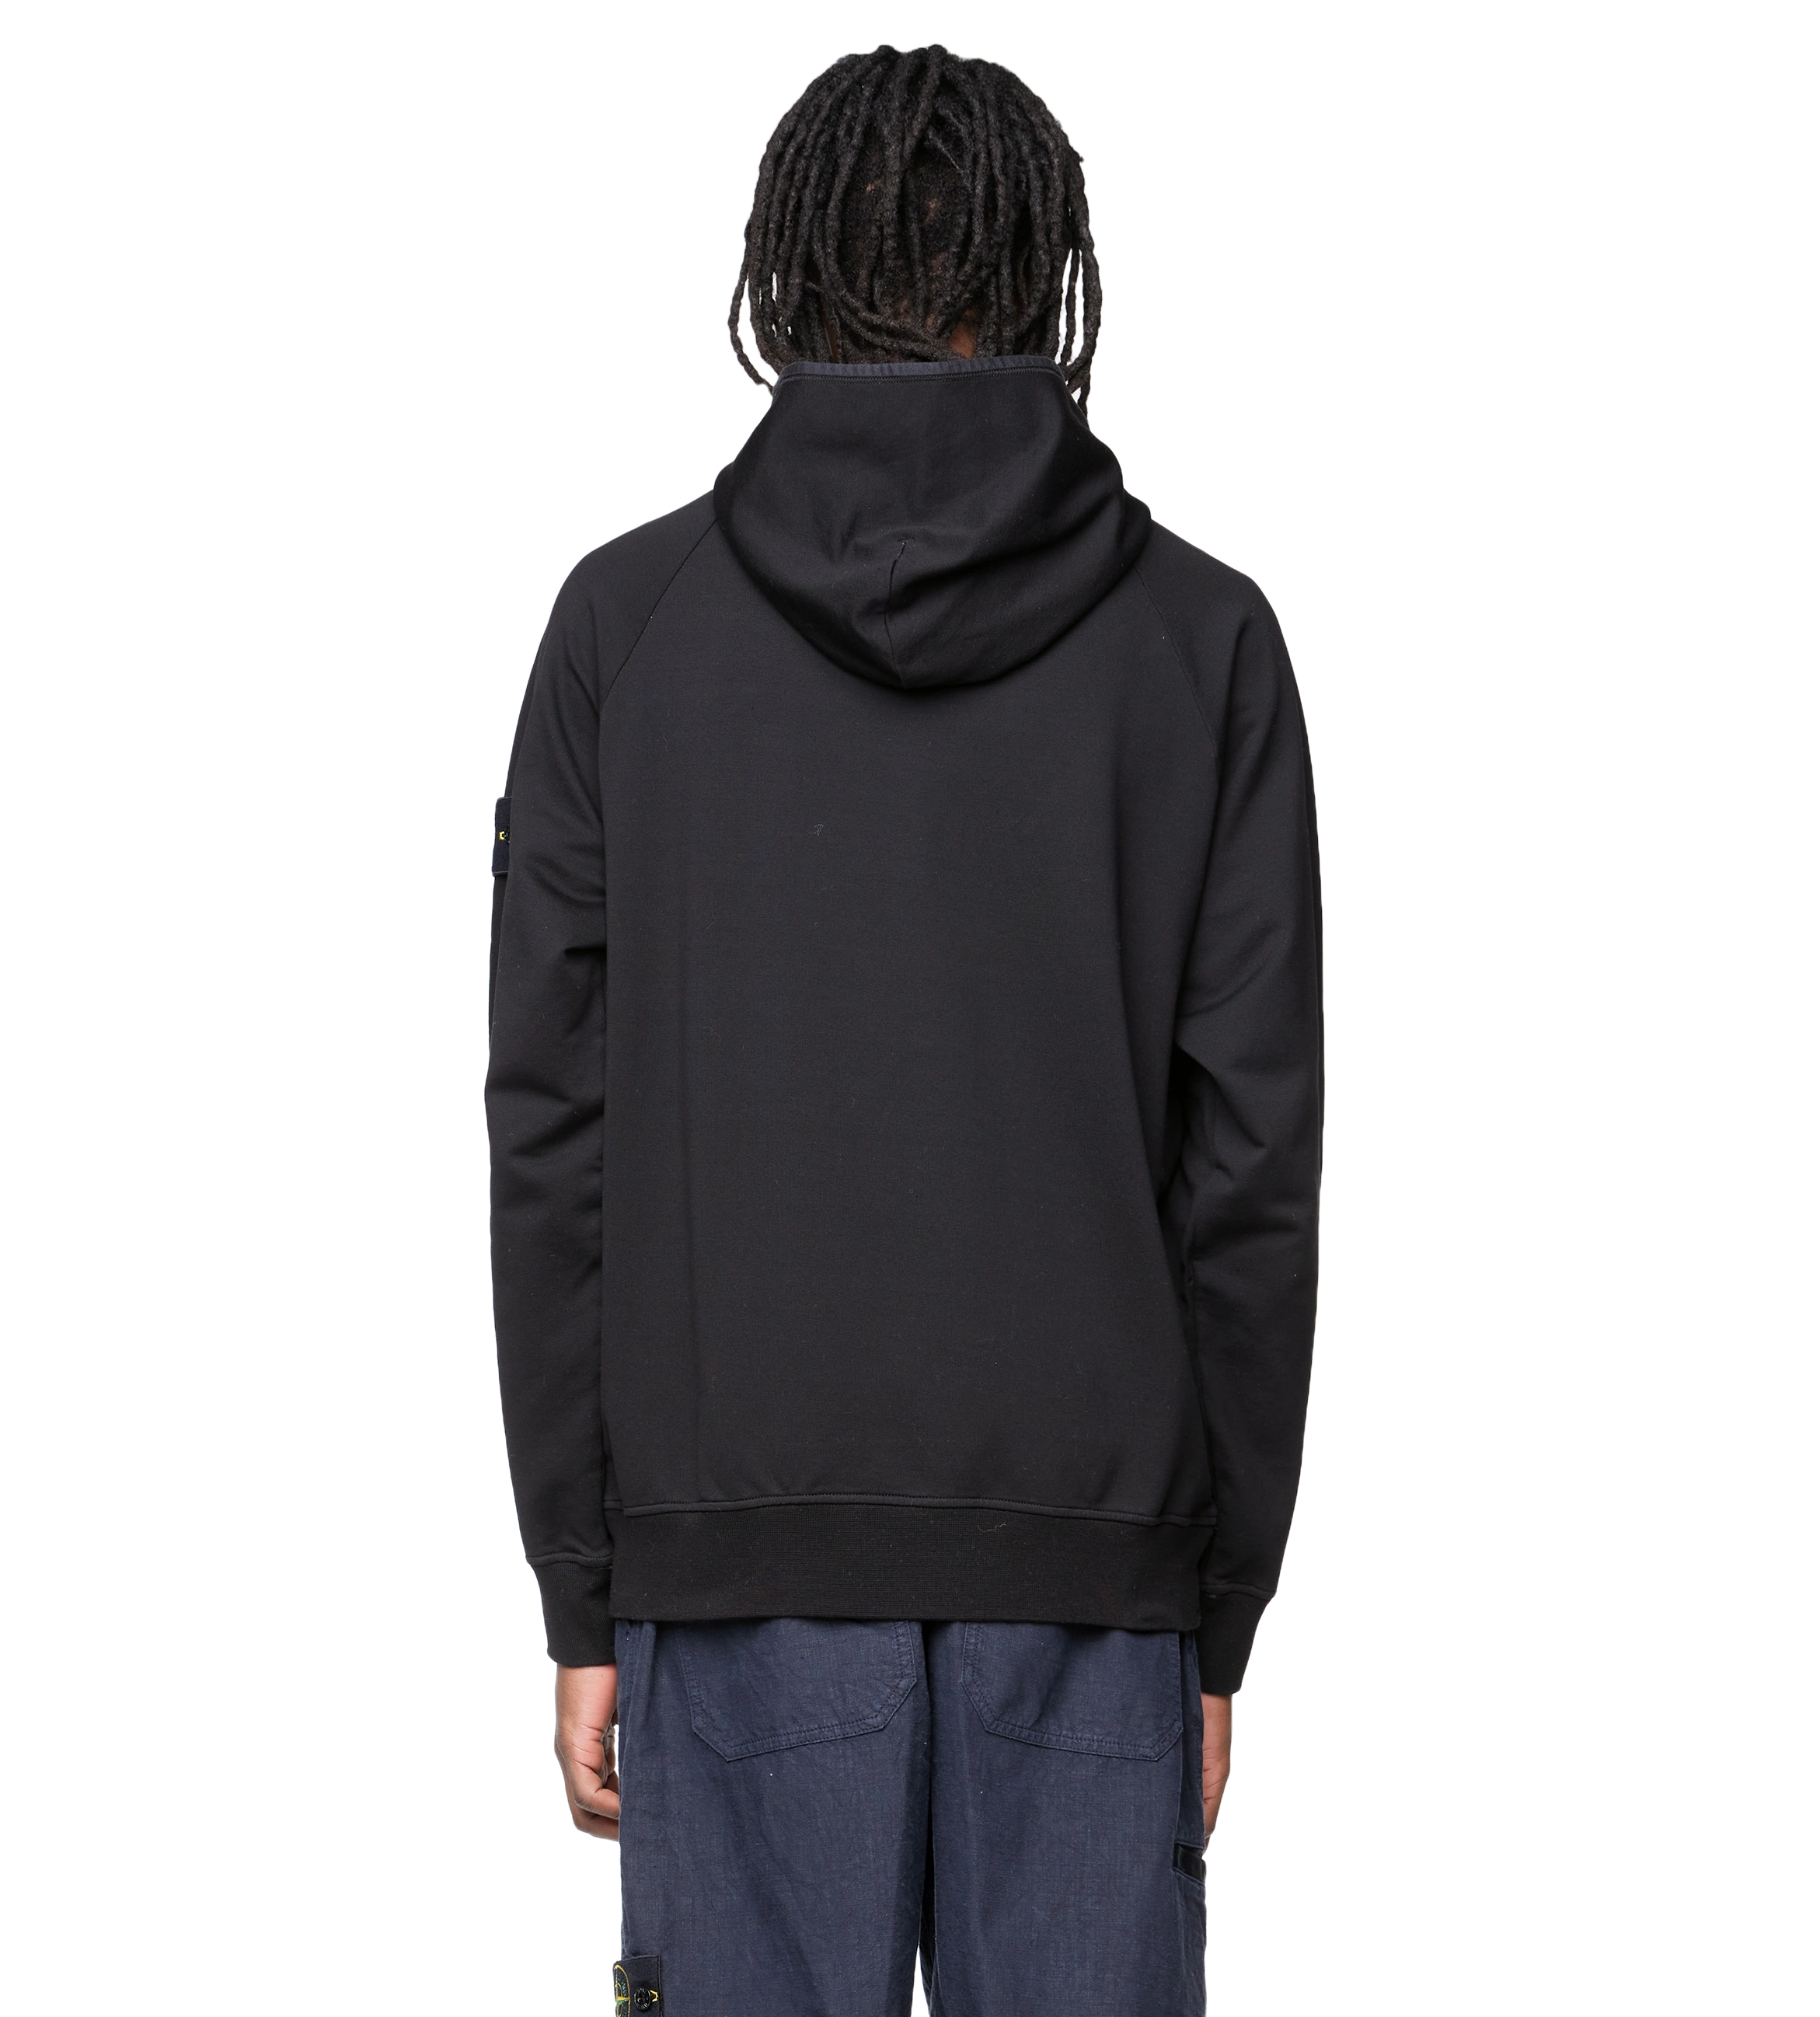 Compass Patch Hoodie Black